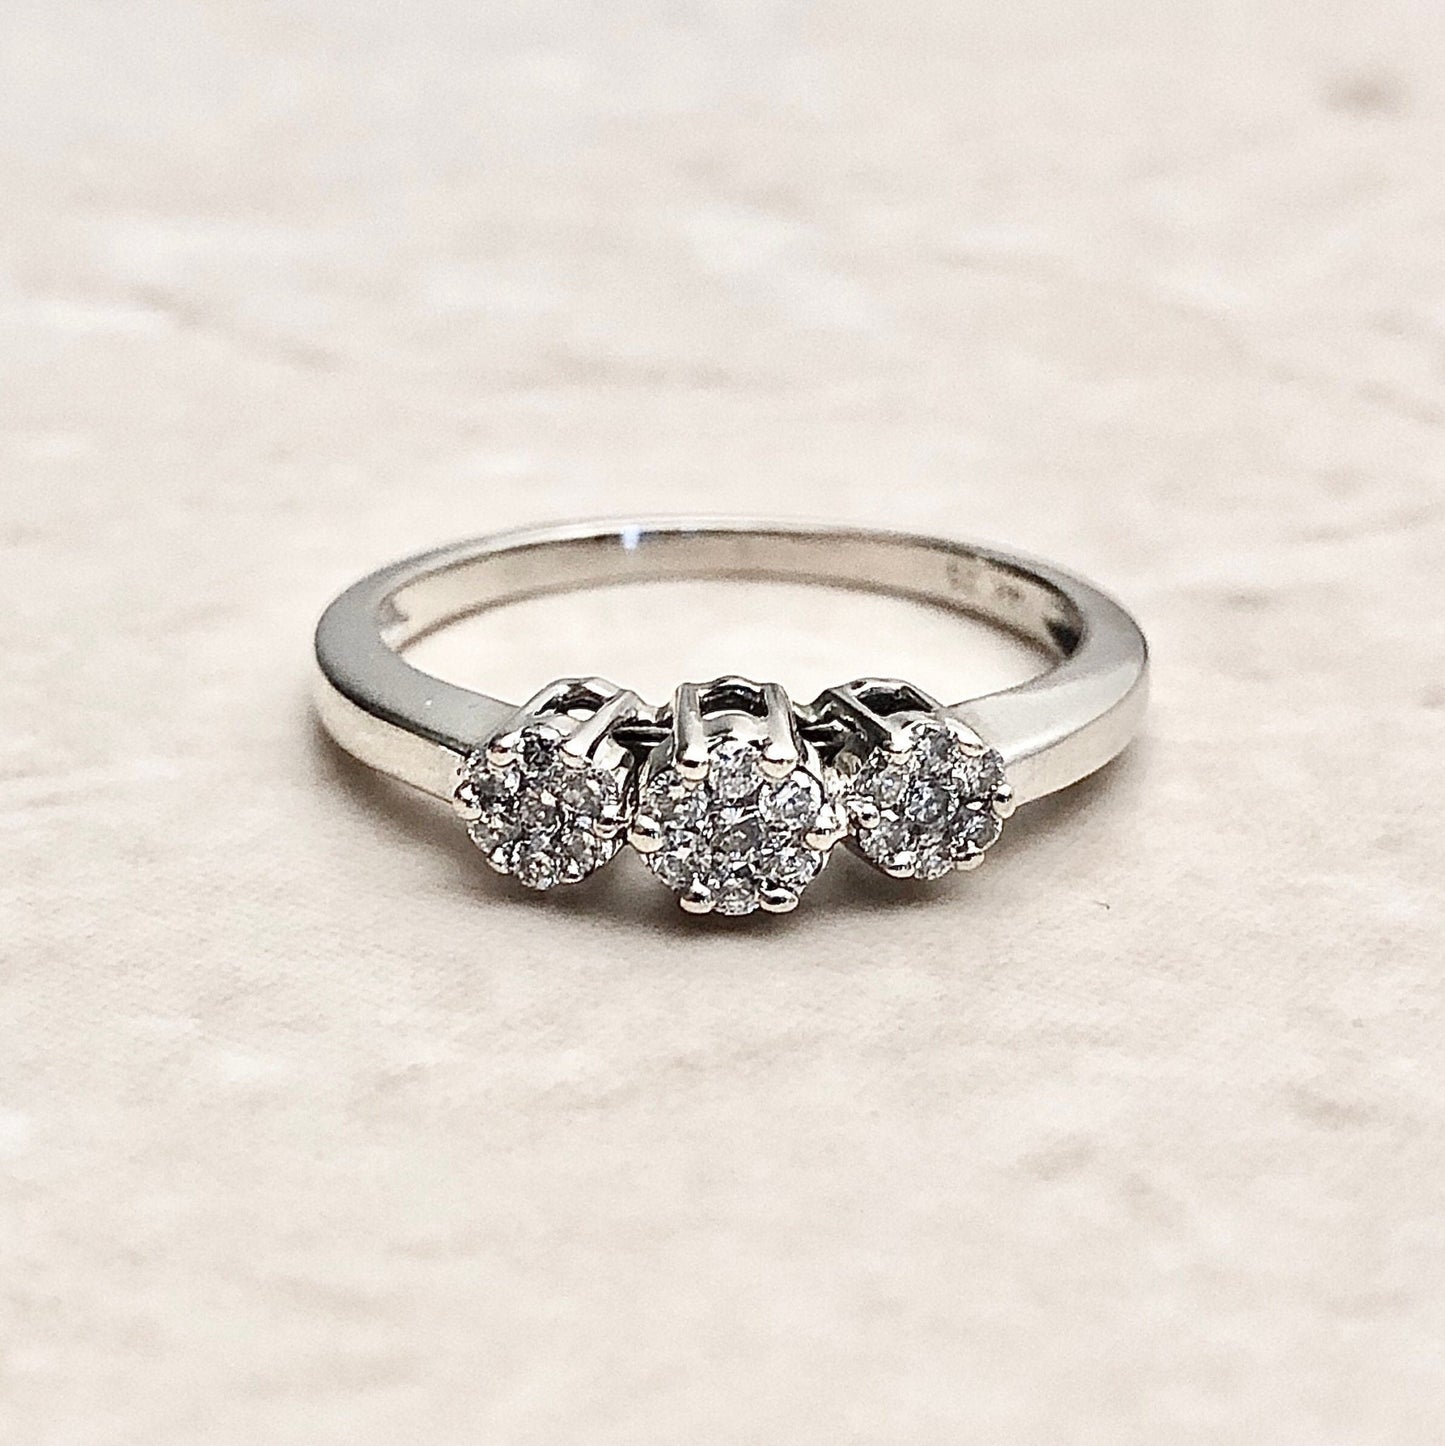 14K Cluster Pave Diamond Ring - White Gold Diamond Cocktail Ring - Birthday Gift For Her - Bridal Ring - Promis Ring - Engagement Ring